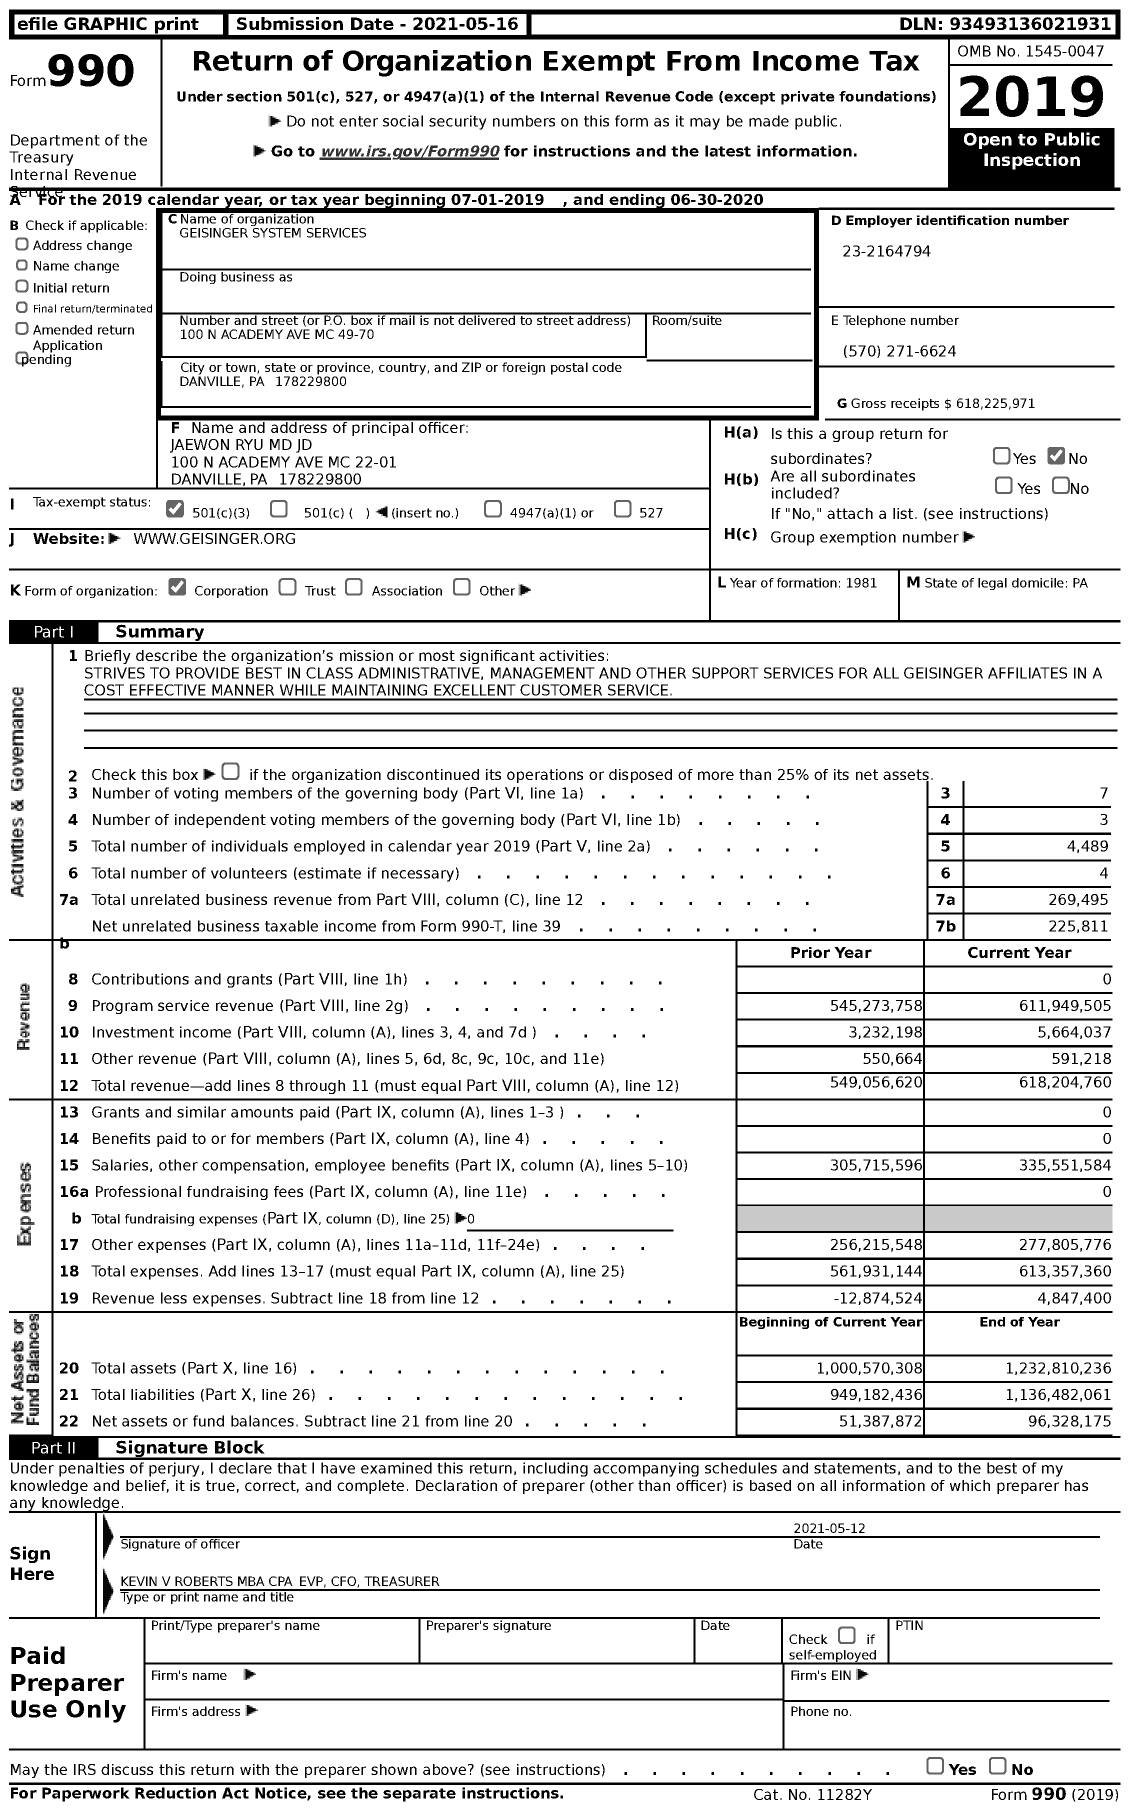 Image of first page of 2019 Form 990 for Geisinger System Services (GHS)